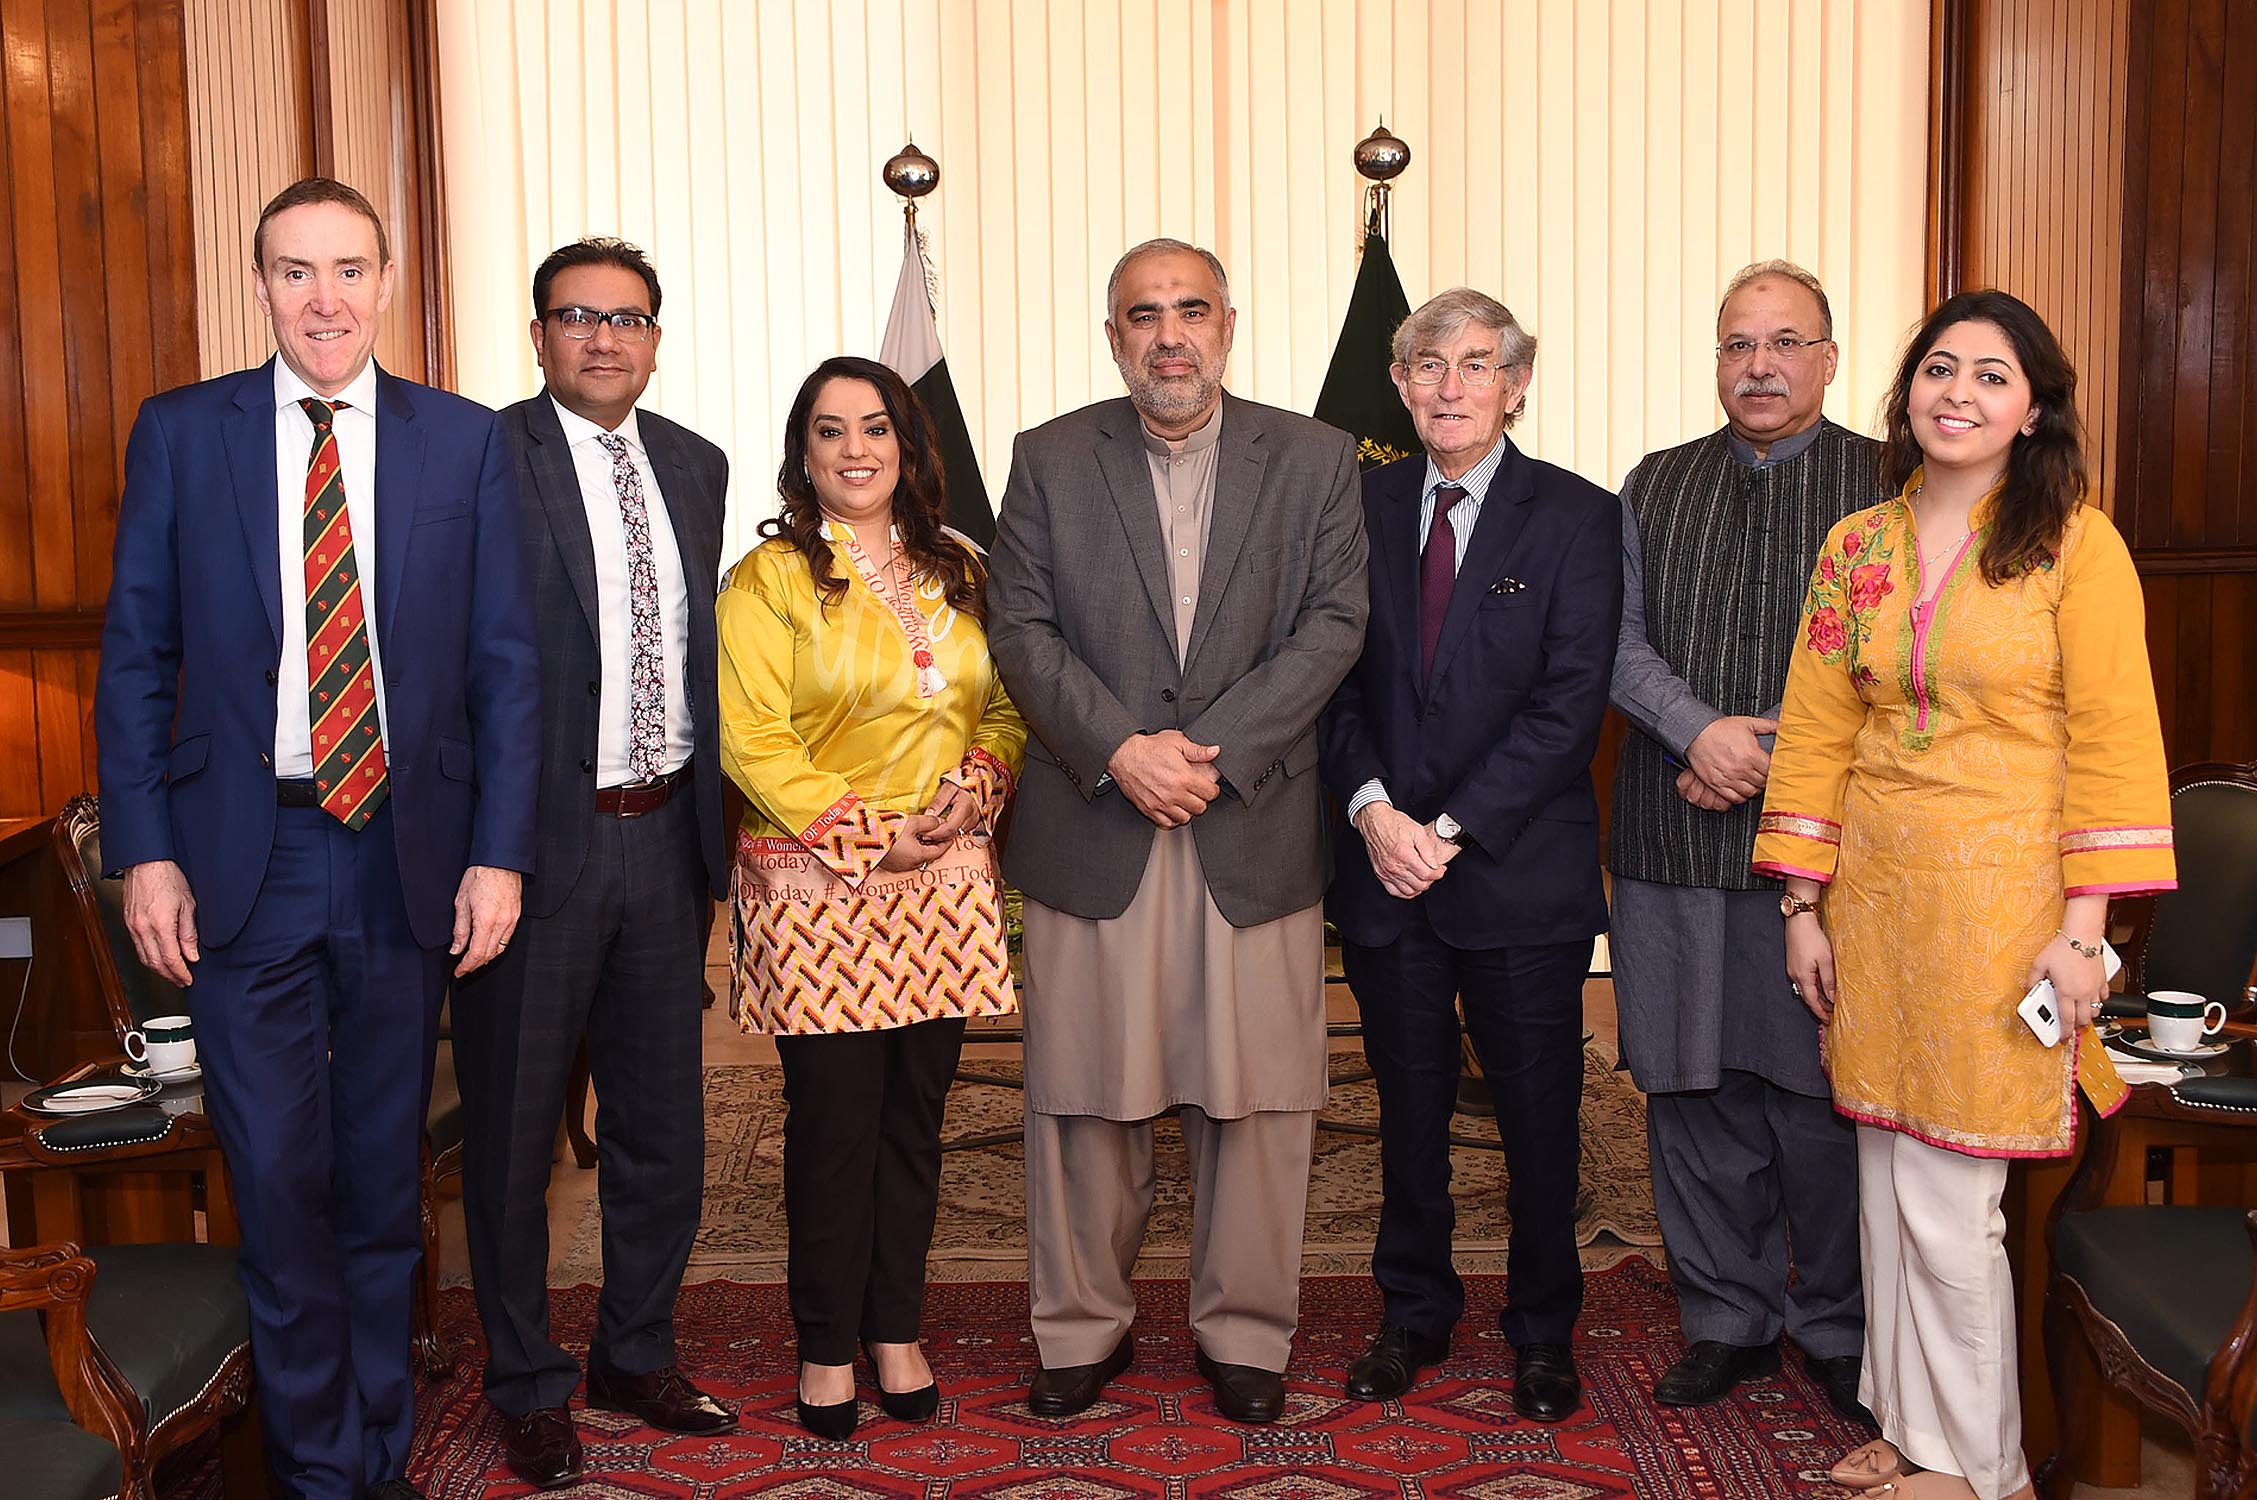 Delegation with the Hon. Speaker of the National Assembly, Asad Qaiser